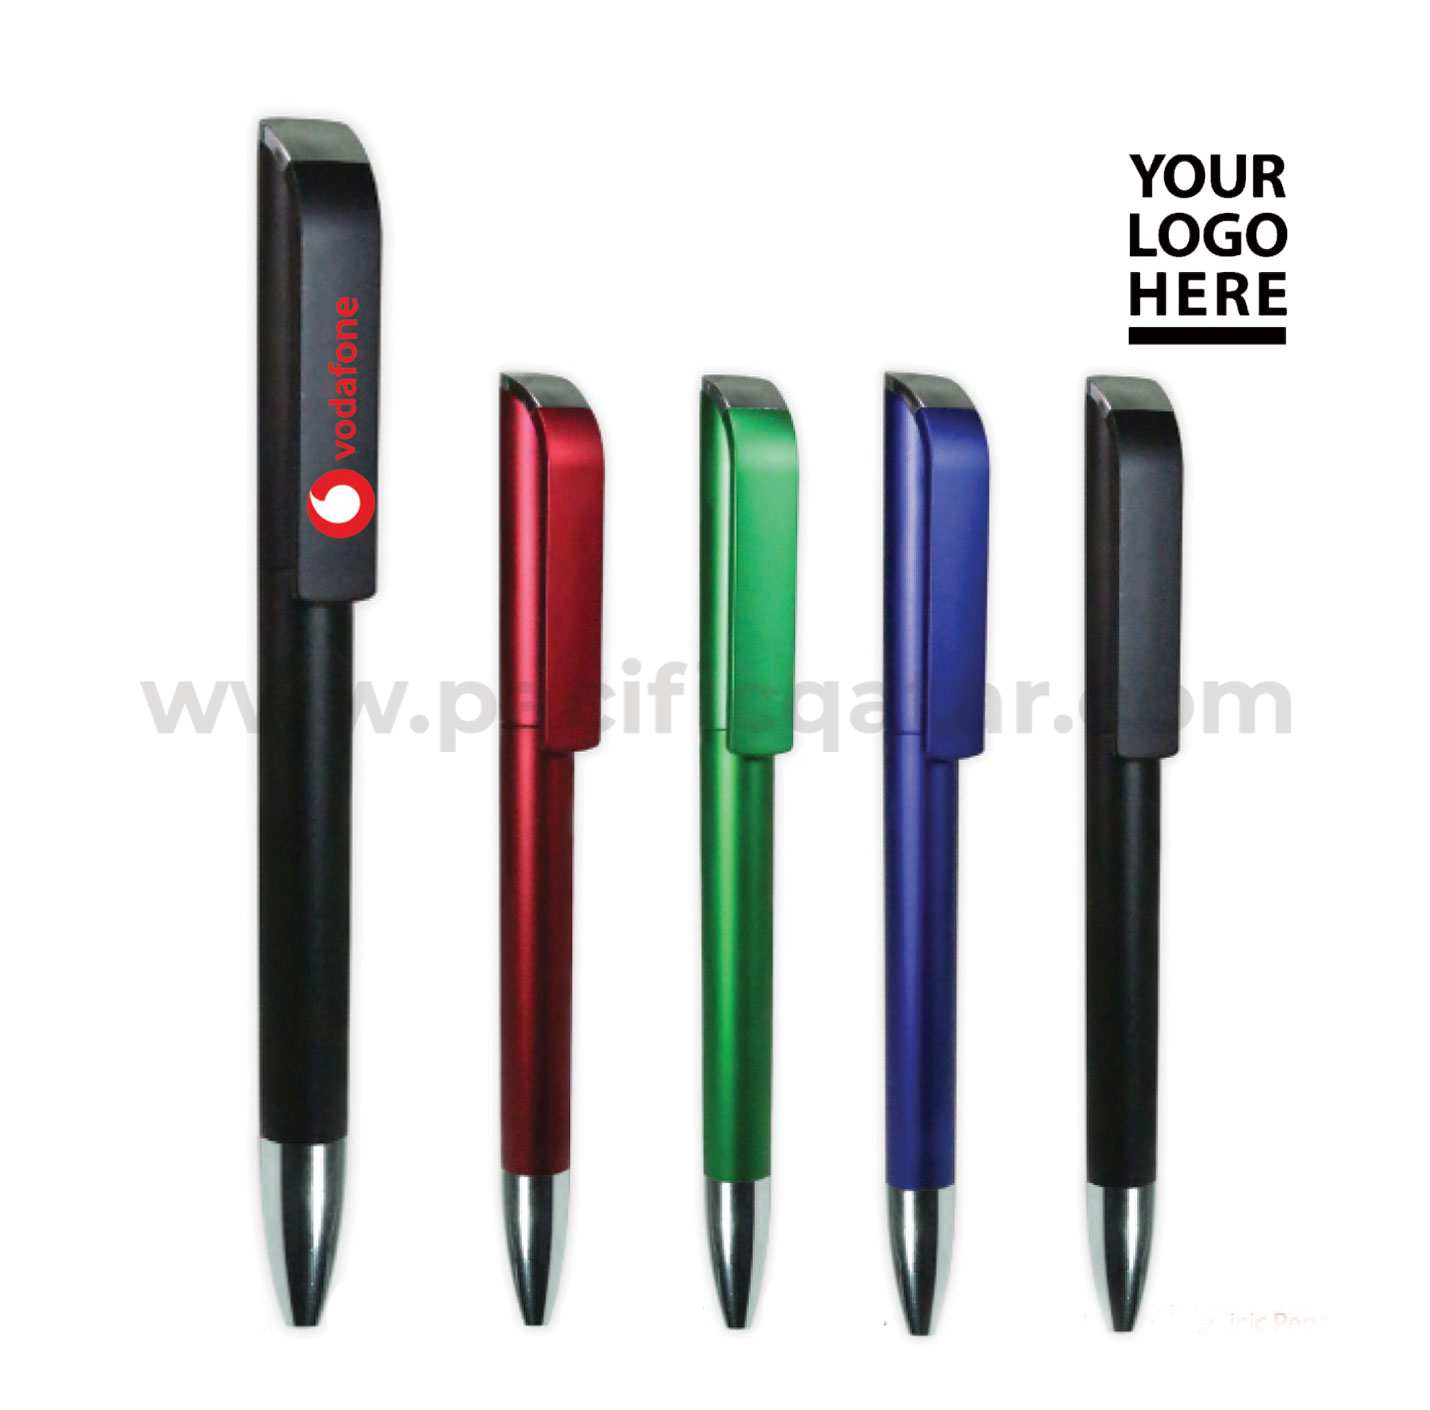 Plastic pen chrome tip with logo and in various color